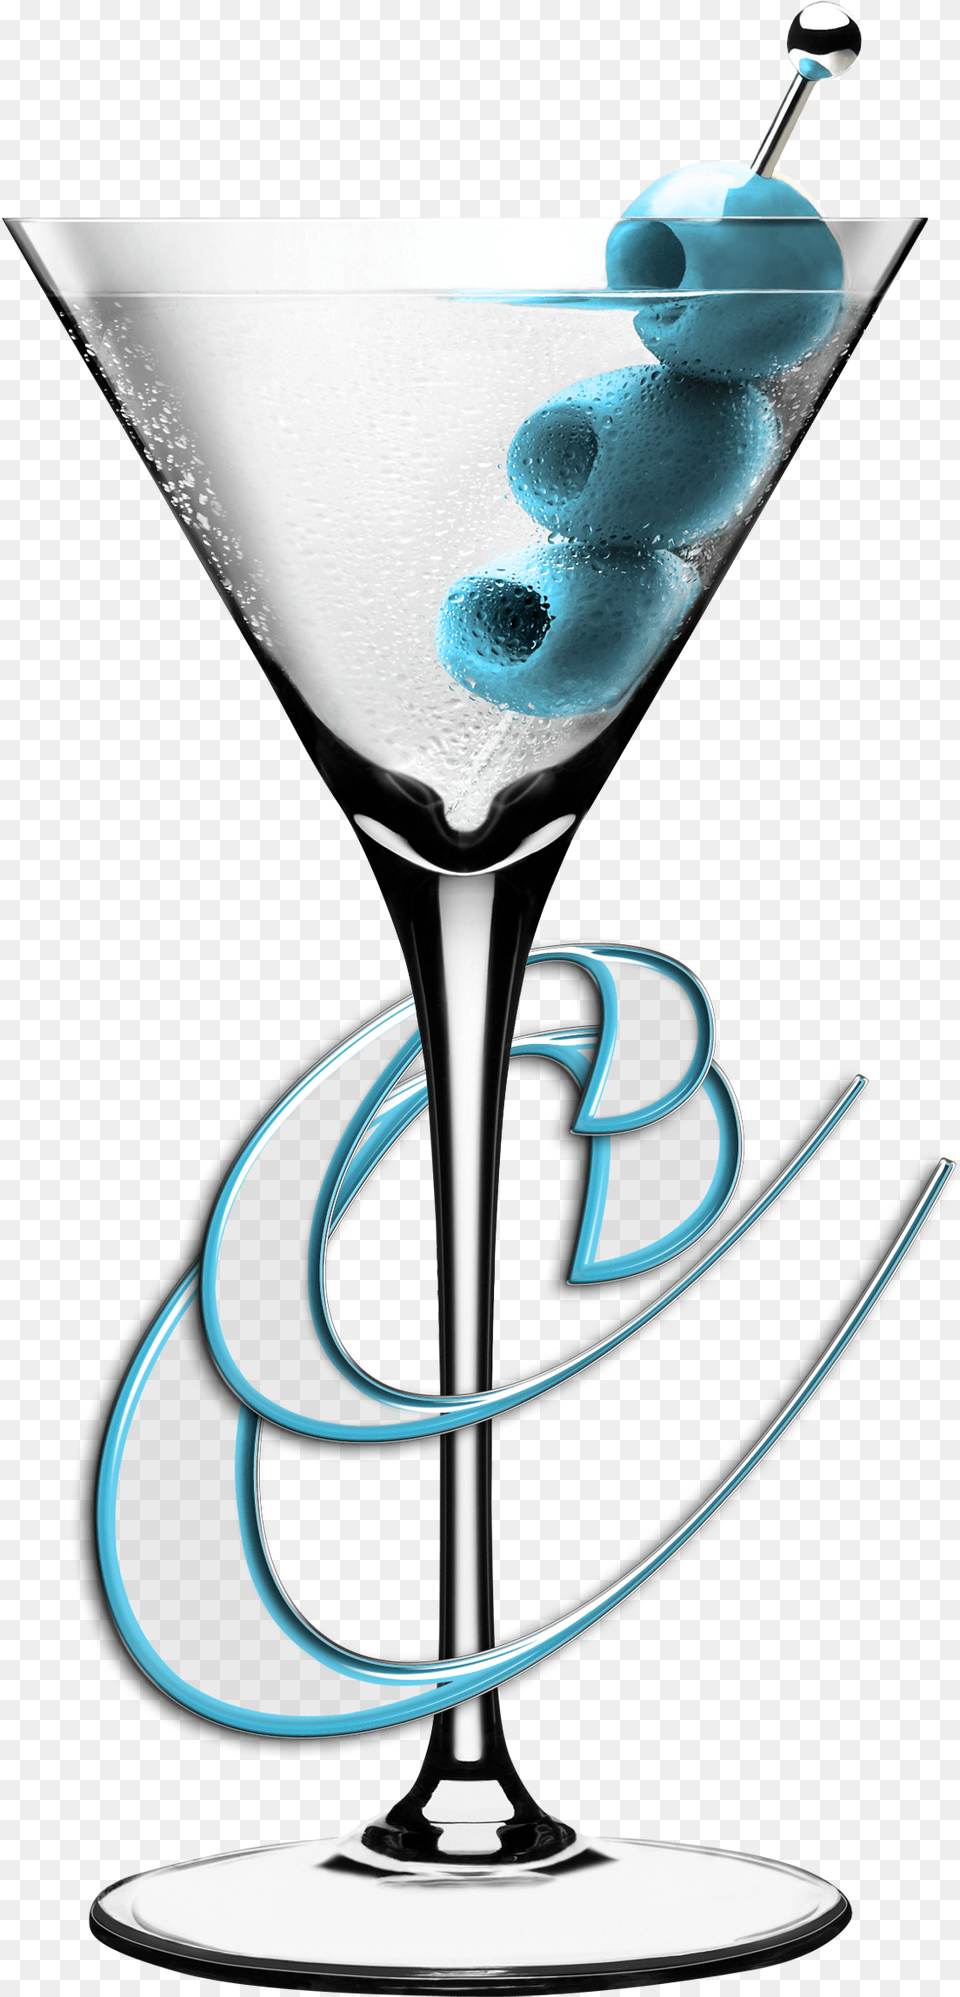 Cocktails And Caviar Martini Glass With Blue Olives Dry Martini Cocktail With Green Olive, Alcohol, Beverage, Smoke Pipe Free Transparent Png